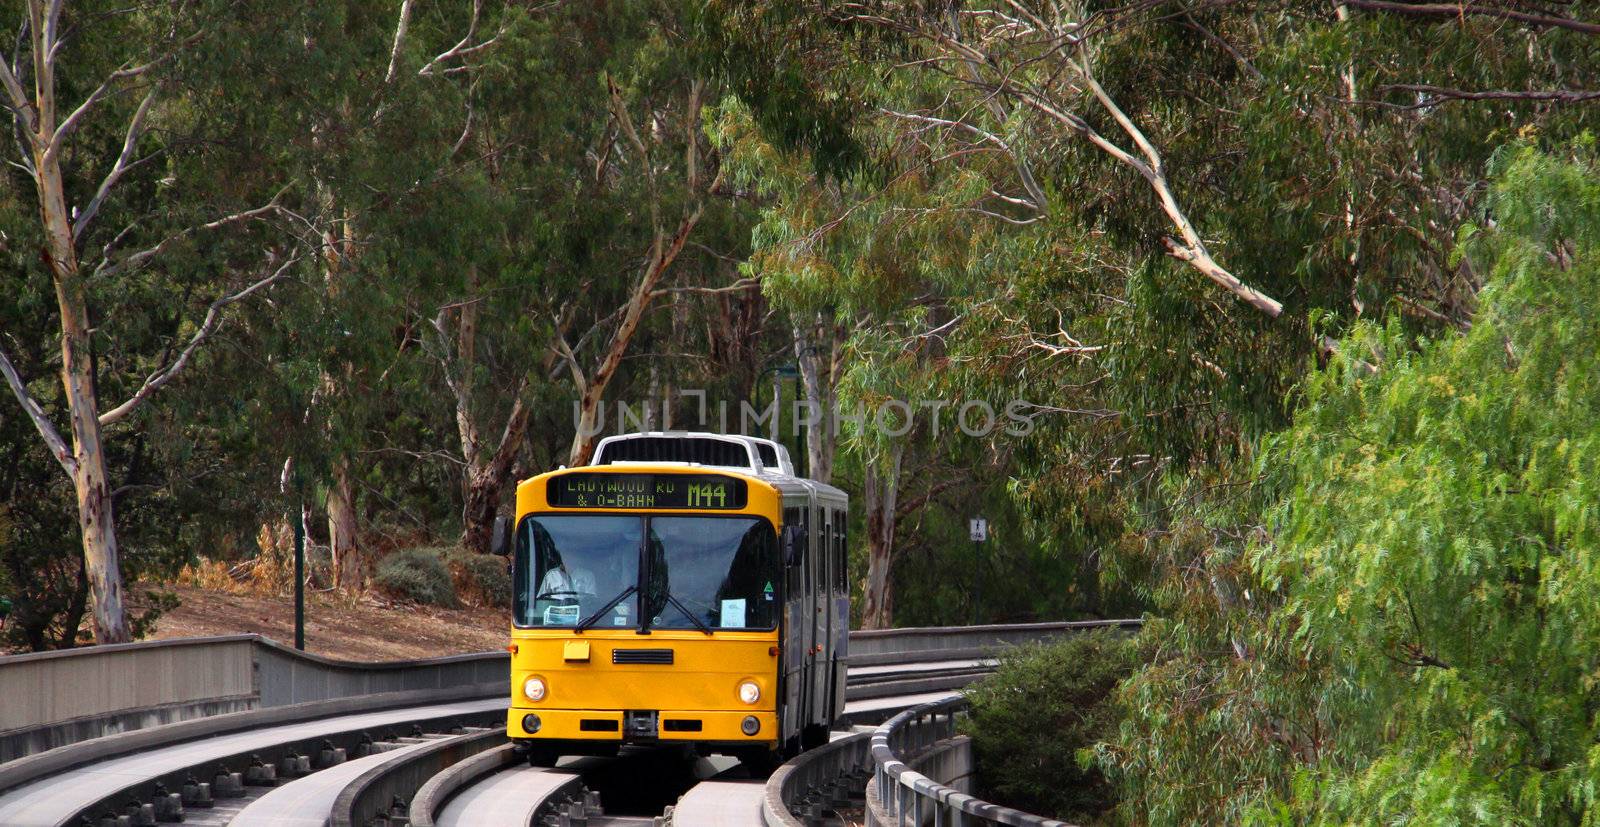 Bus traveling at high speeds on the O-bahn Track, Adelaide, Aust by Cloudia